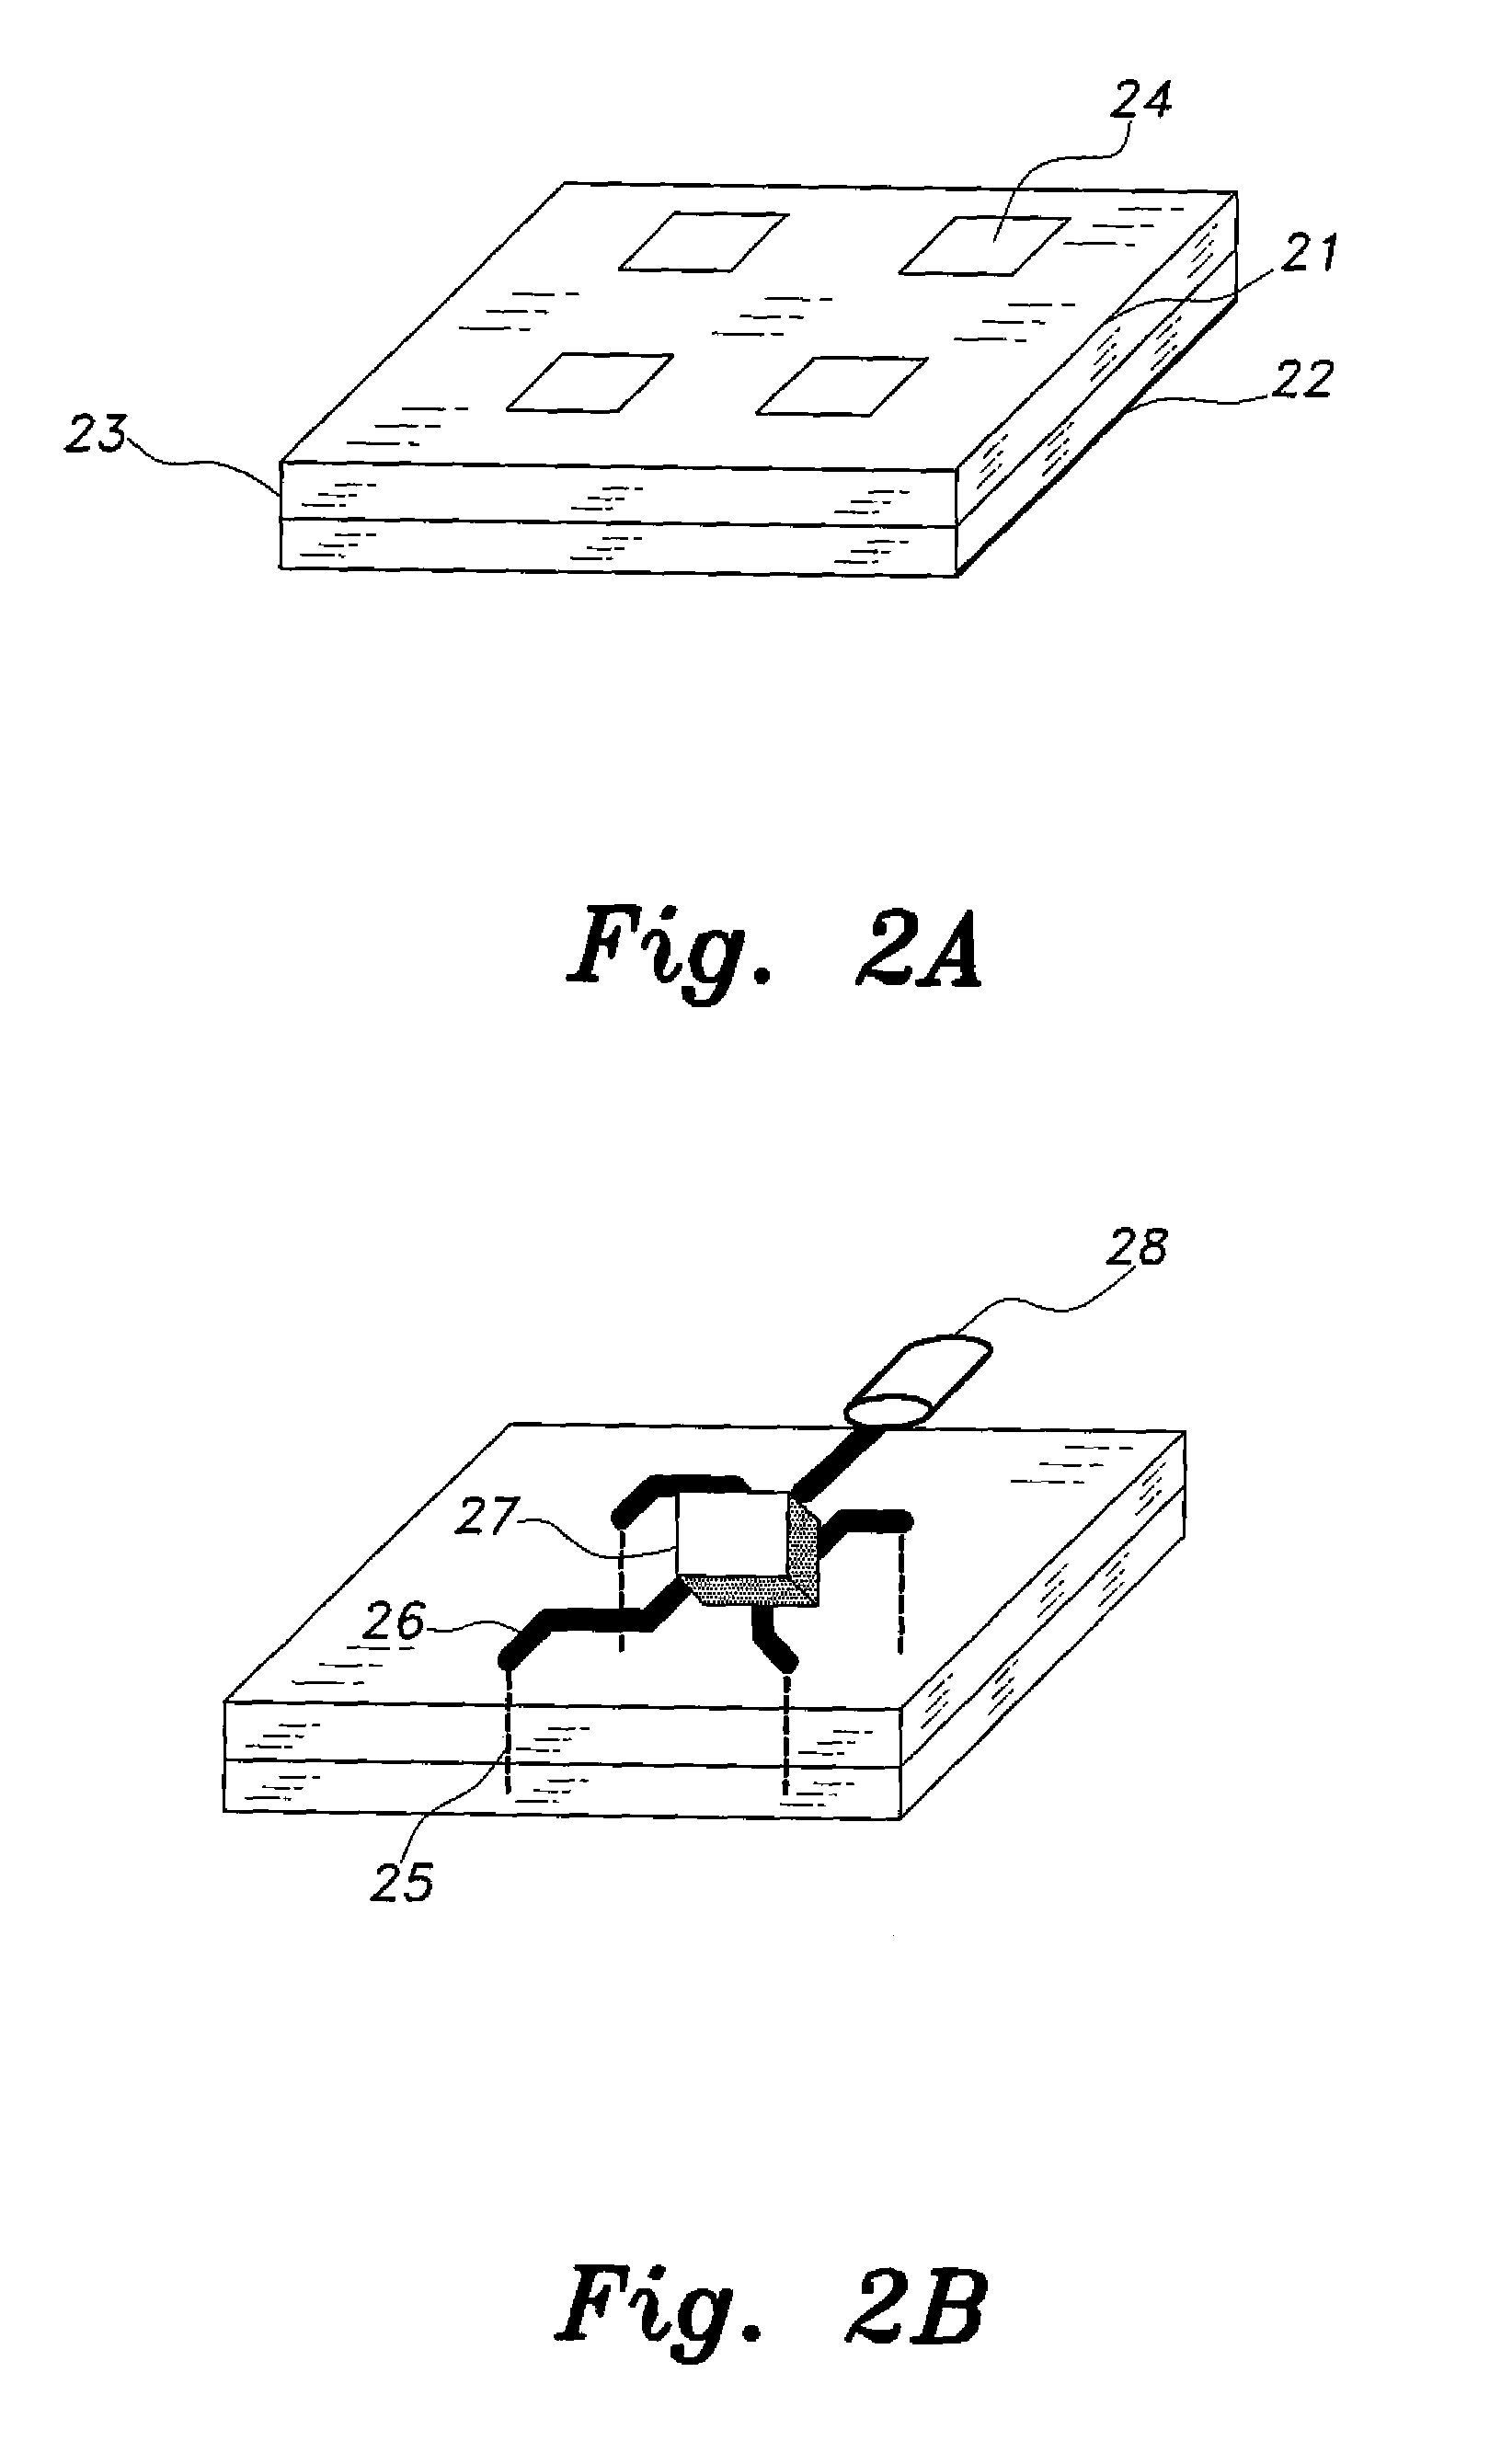 Single-antenna direction finding system for multi-rotor platforms